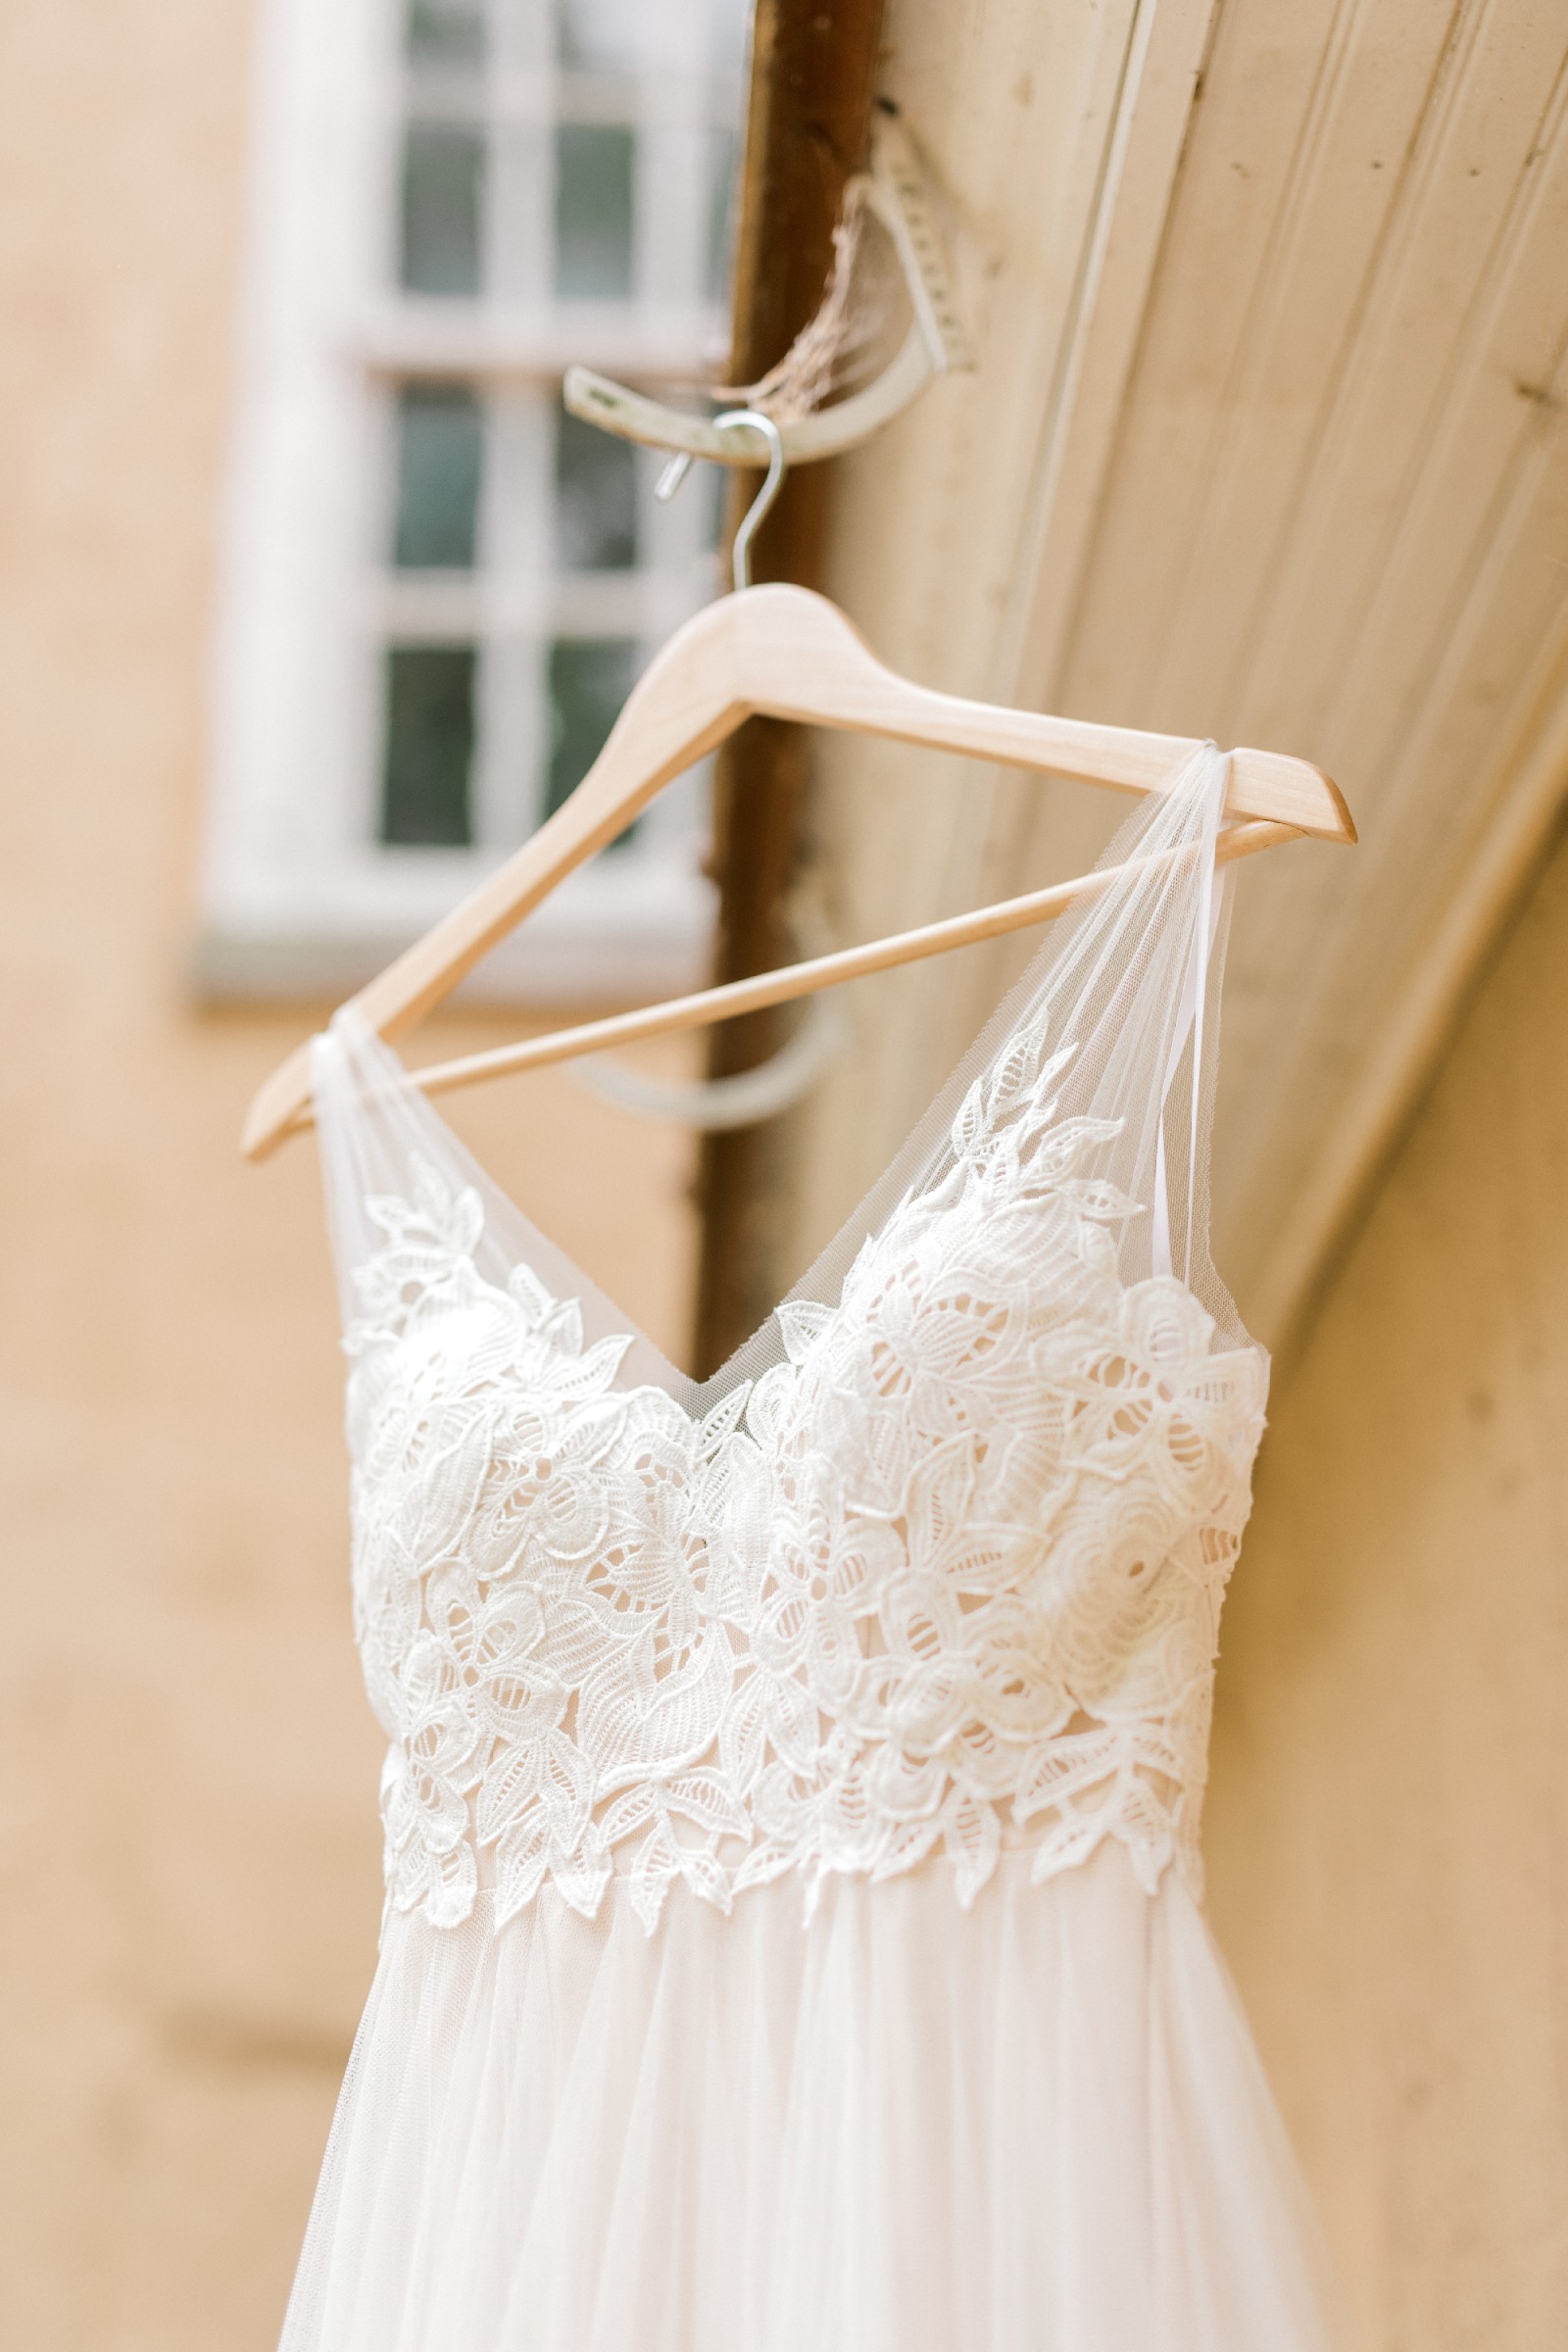 bhldn heritage gown